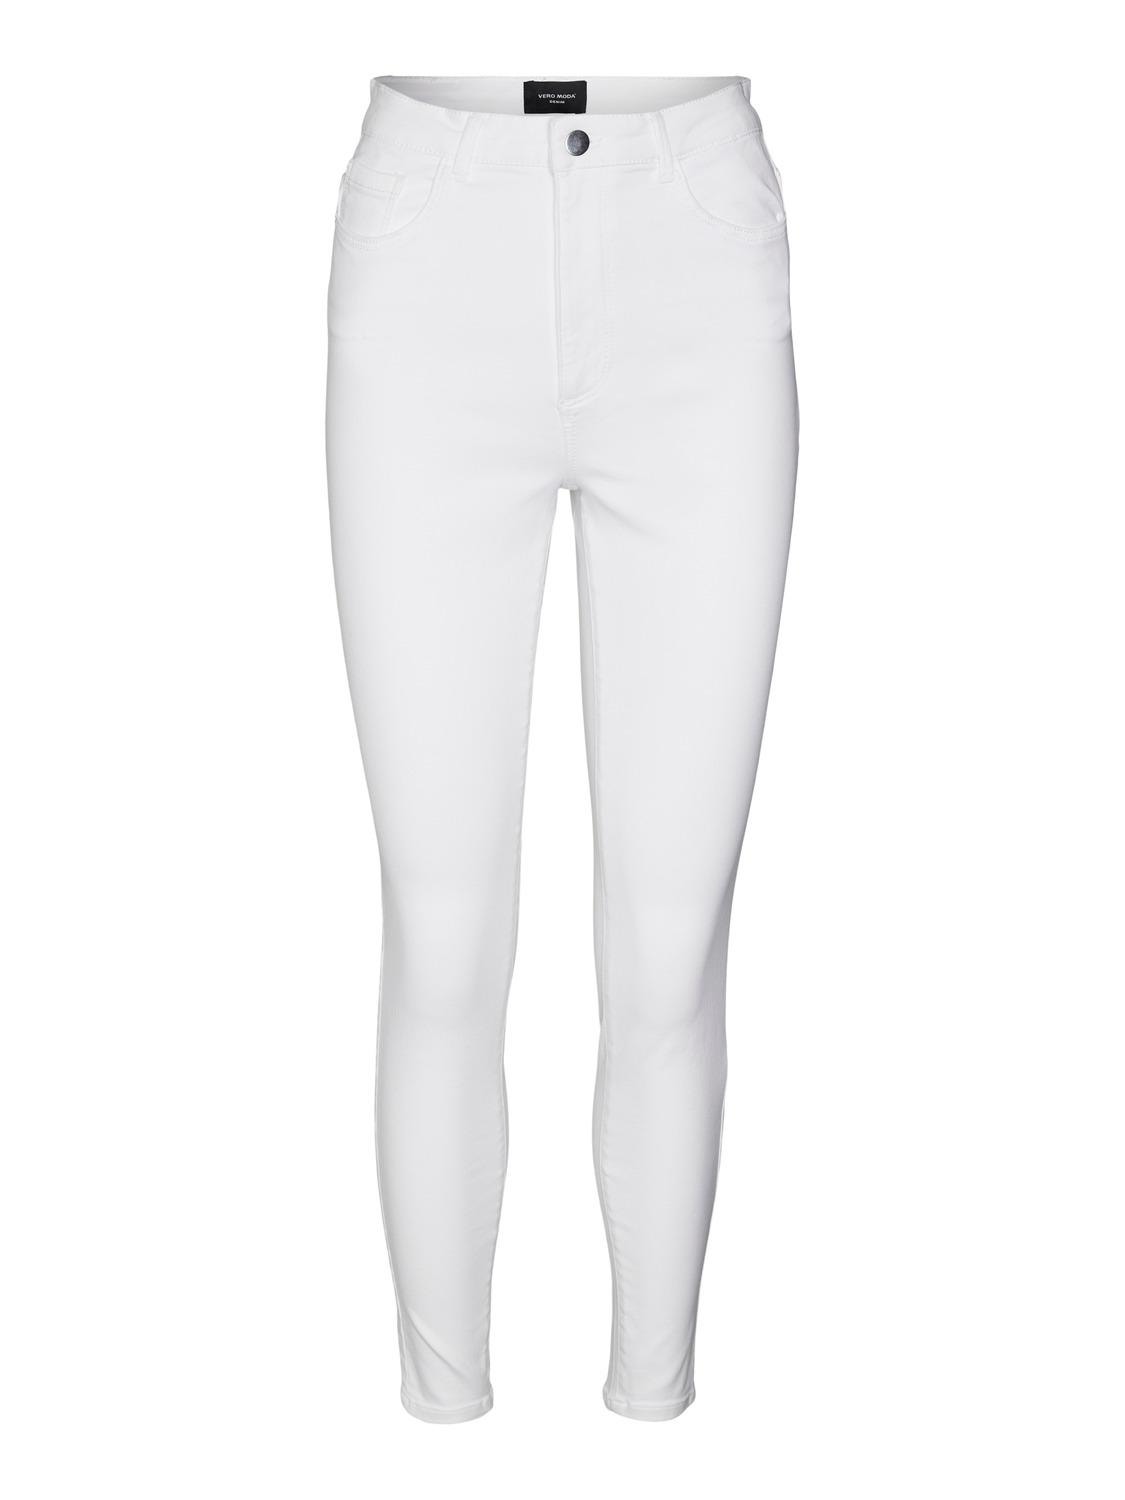 Skinny Fit High rise Jeans | White | Vero